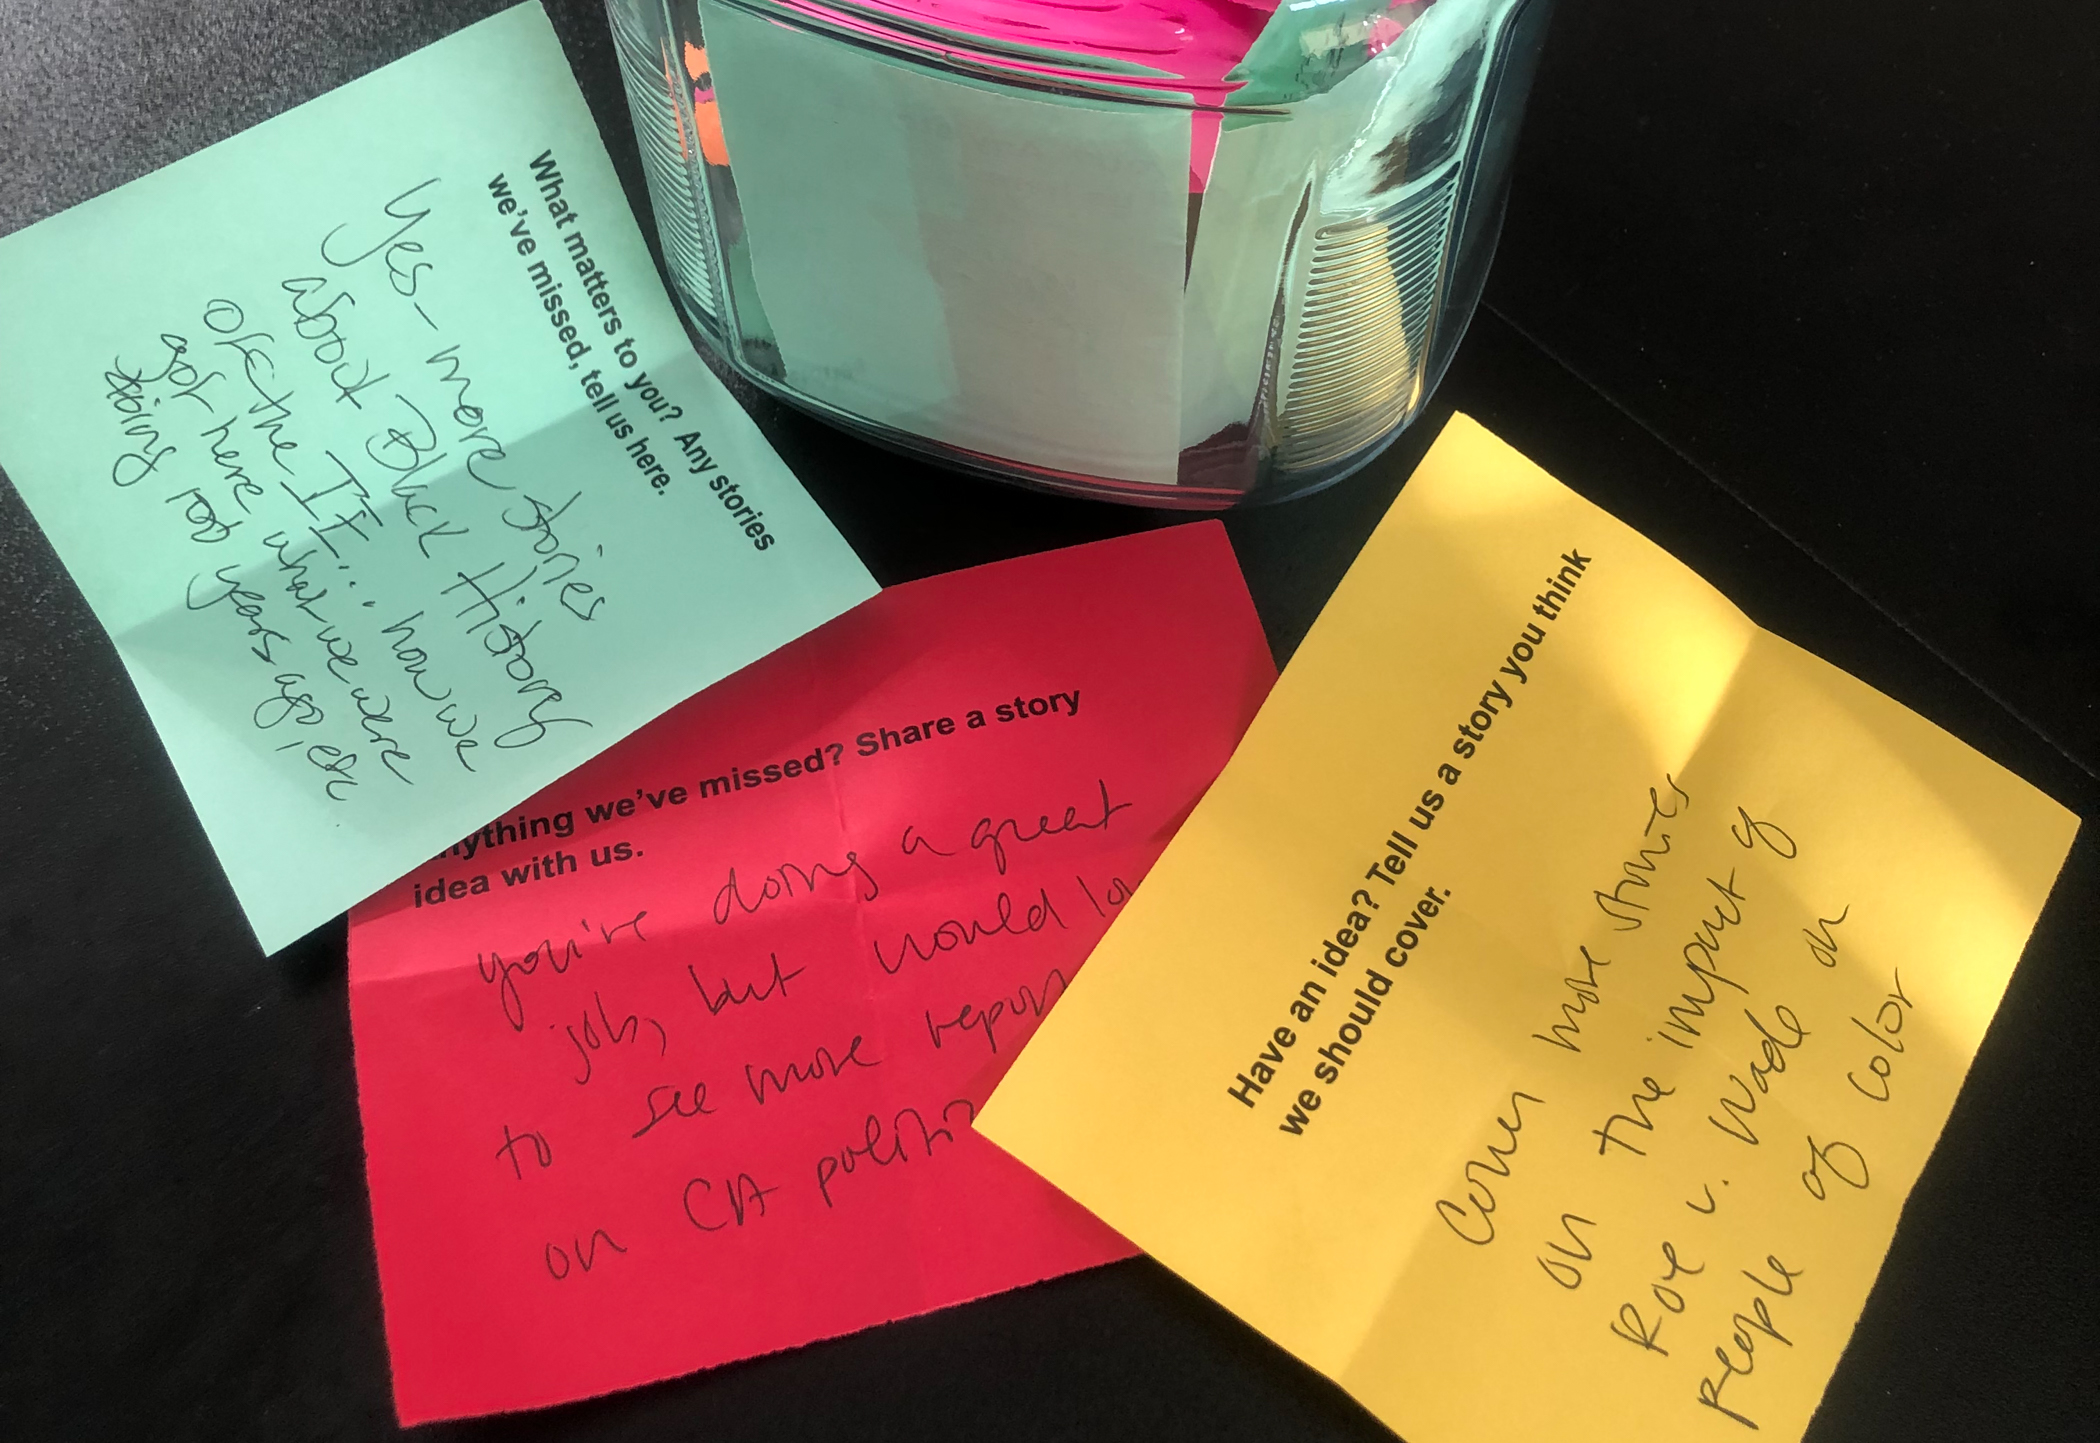 A photo of blue, red, and yellow slips of paper with the prompt "What matters to you? Any stories we've missed, tell us here." and written-in suggestions